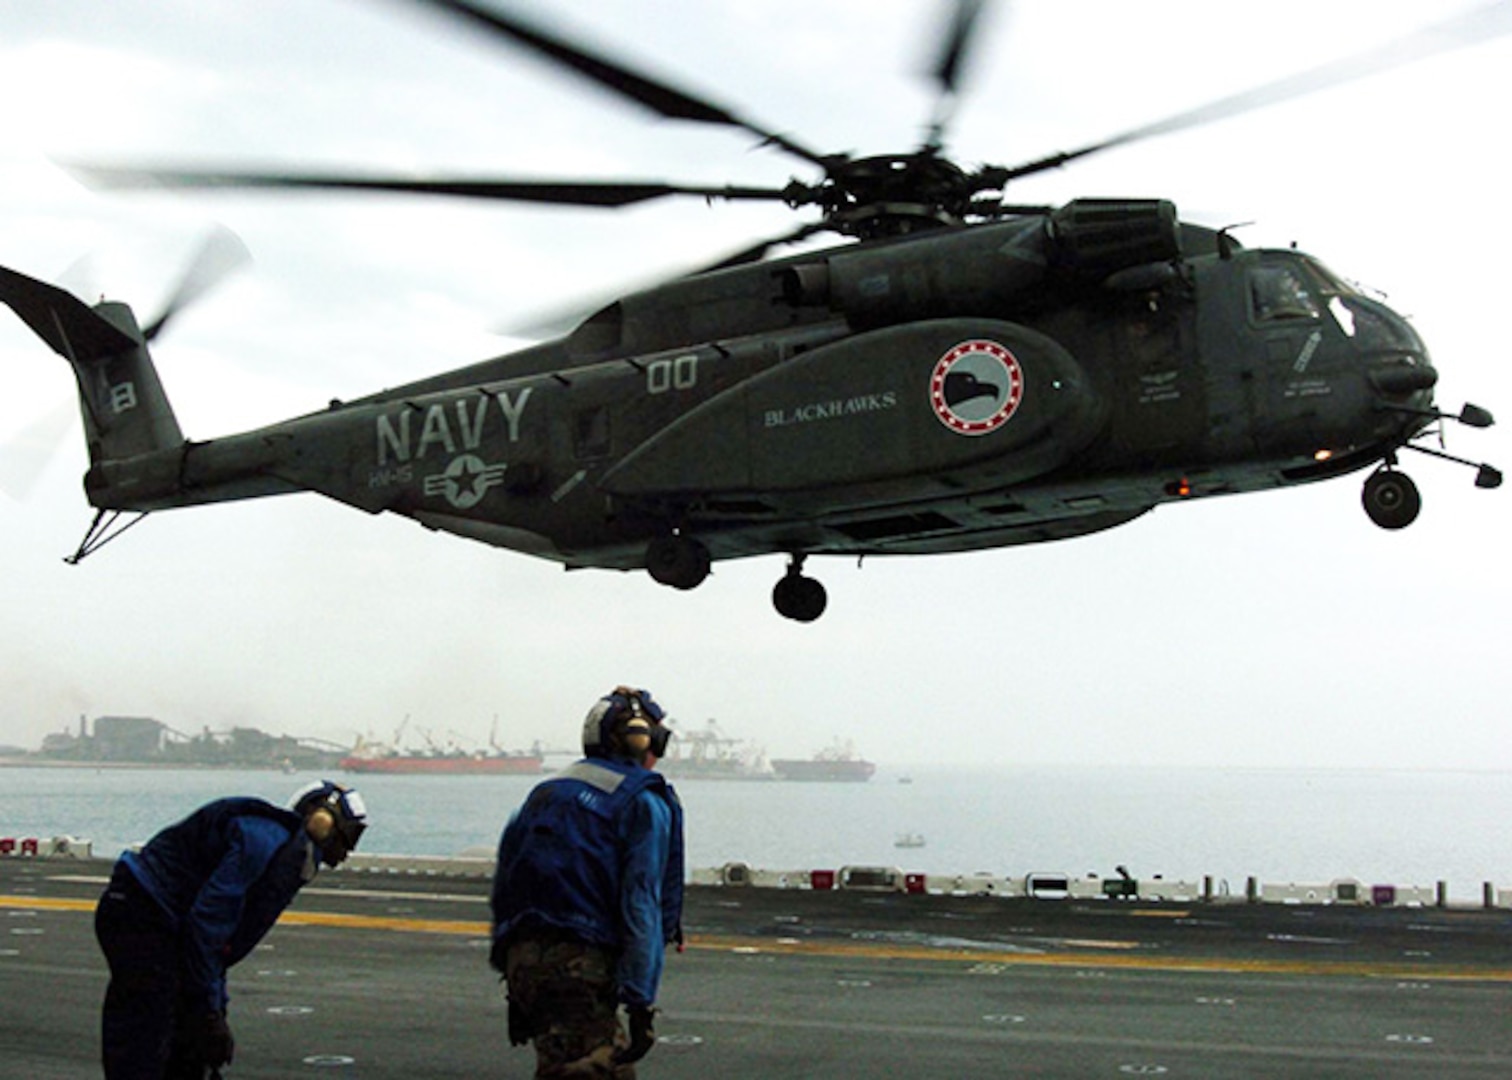 Persian Gulf (Jan. 10, 2005) - An MH-53E Sea Dragon helicopter, assigned to the "Blackhawks" of Helicopter Mine Countermeasures Squadron Fifteen (HM-15), lands on the flight deck aboard the amphibious assault ship USS Essex (LHD 2). Essex is undergoing preparations to support Operation Unified Assistance, the humanitarian operation effort in the wake of the Tsunami that struck South East Asia. 
 
    
